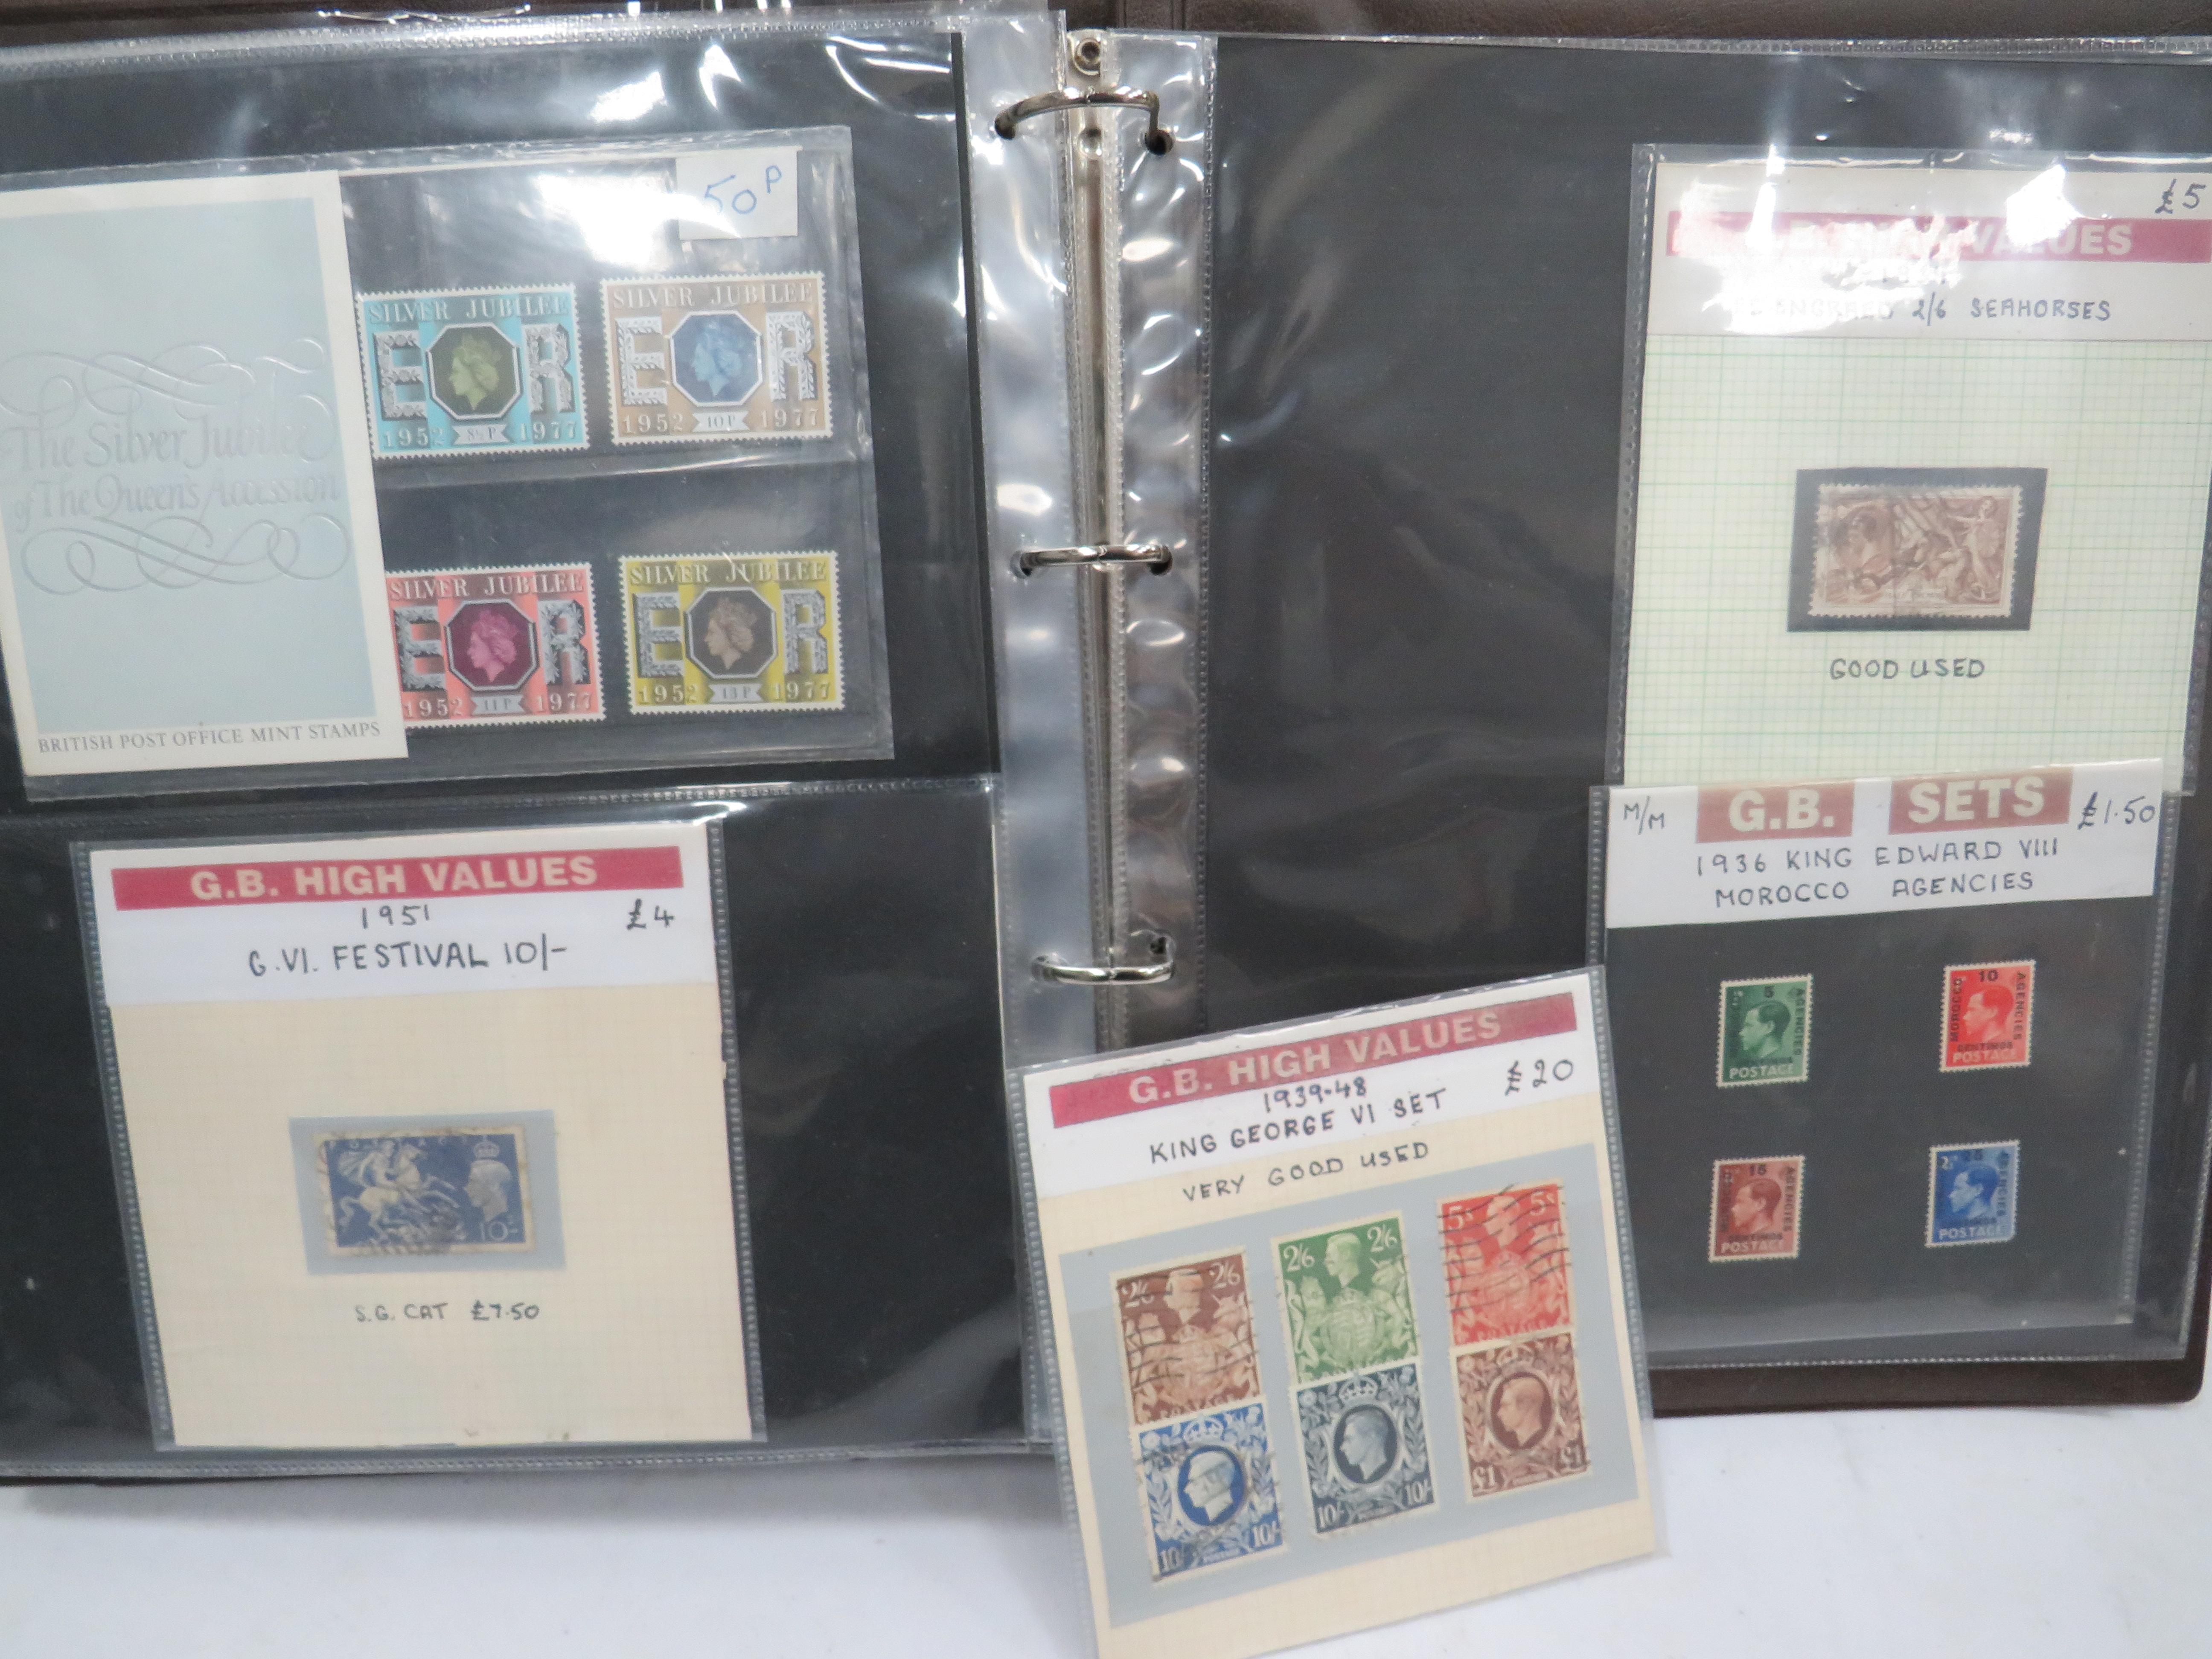 Full and well Presented Album of UK FDC's GB High Values, Coin & Stamp Sets. Victorian Stamps. See m - Image 11 of 14